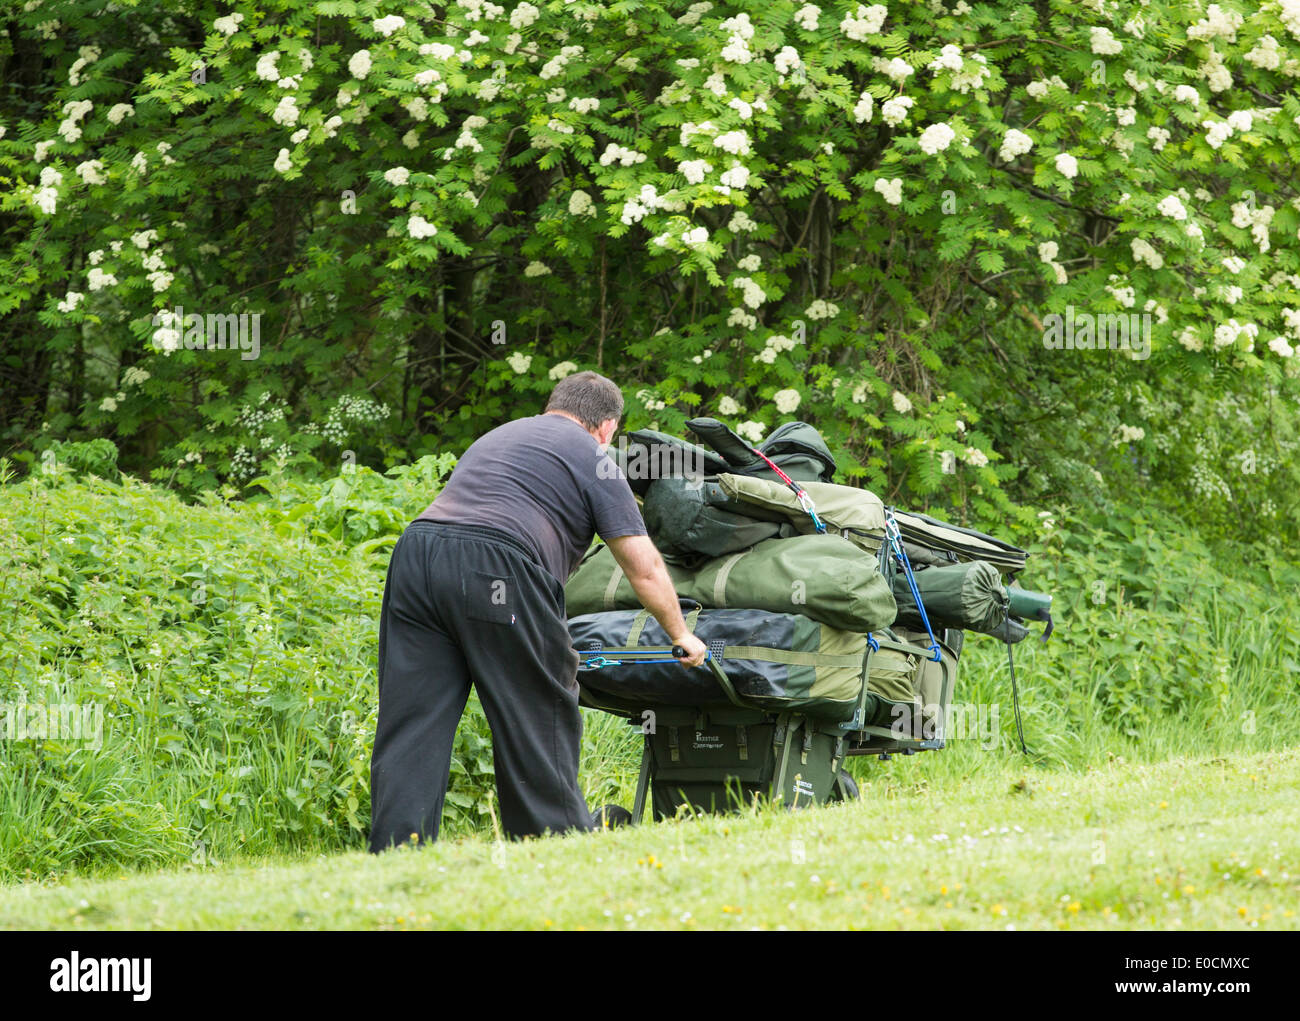 Charlton`s Pond, Billingham, England, UK. 9th May 2014. Gone fishing. Angler wheels his mountain of fishing tackle to the  lakeside from carpark, undetered  by the weekend forecast for blustery and wet weather Credit:  ALANDAWSONPHOTOGRAPHY/Alamy Live News Stock Photo